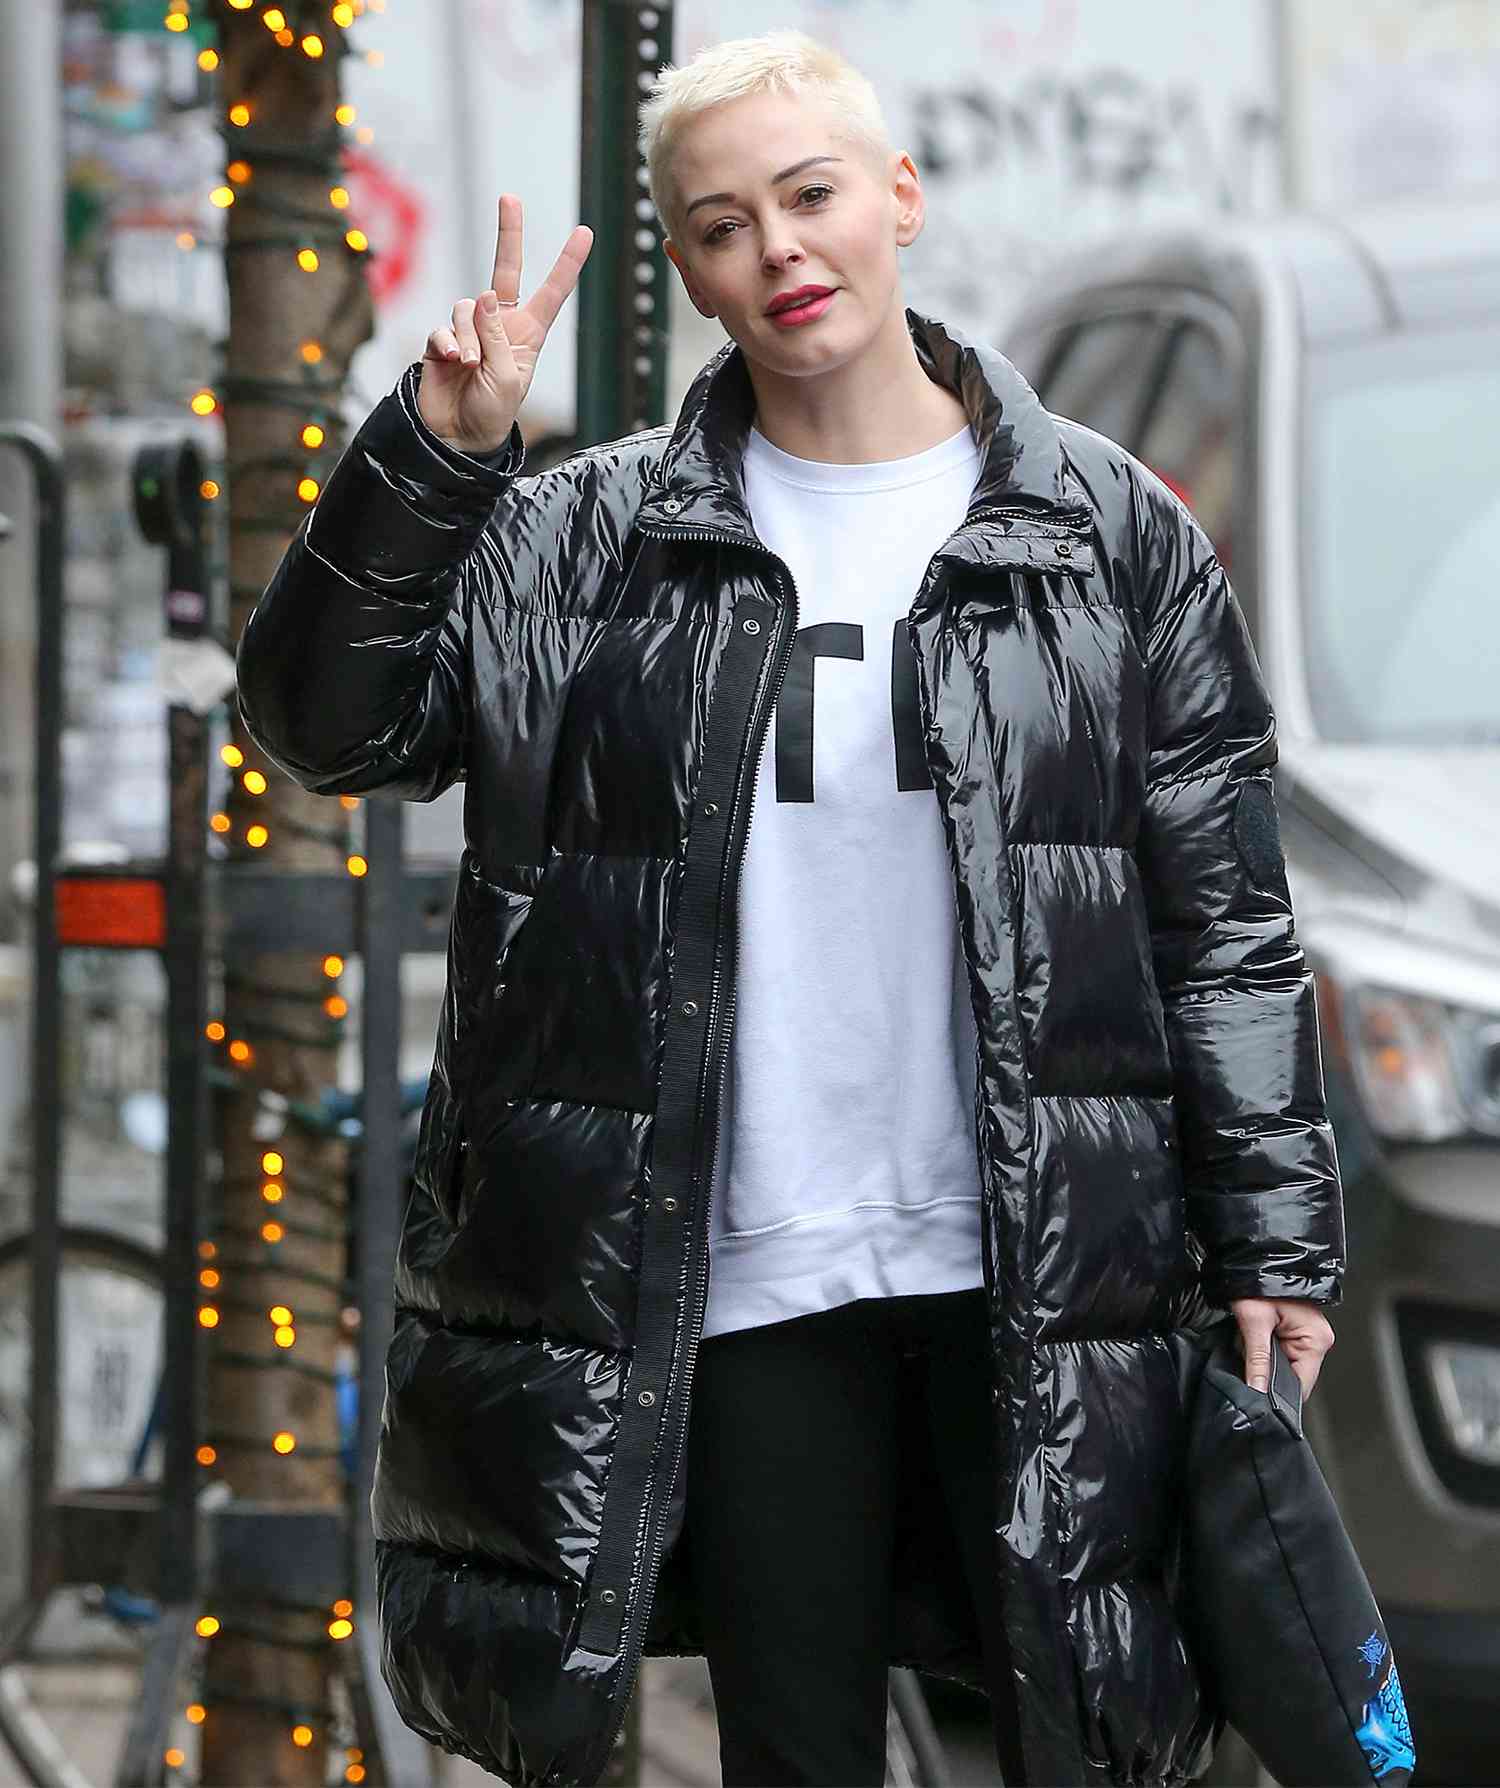 Actress Rose McGowan Flashes The Peace Sign In New York City.